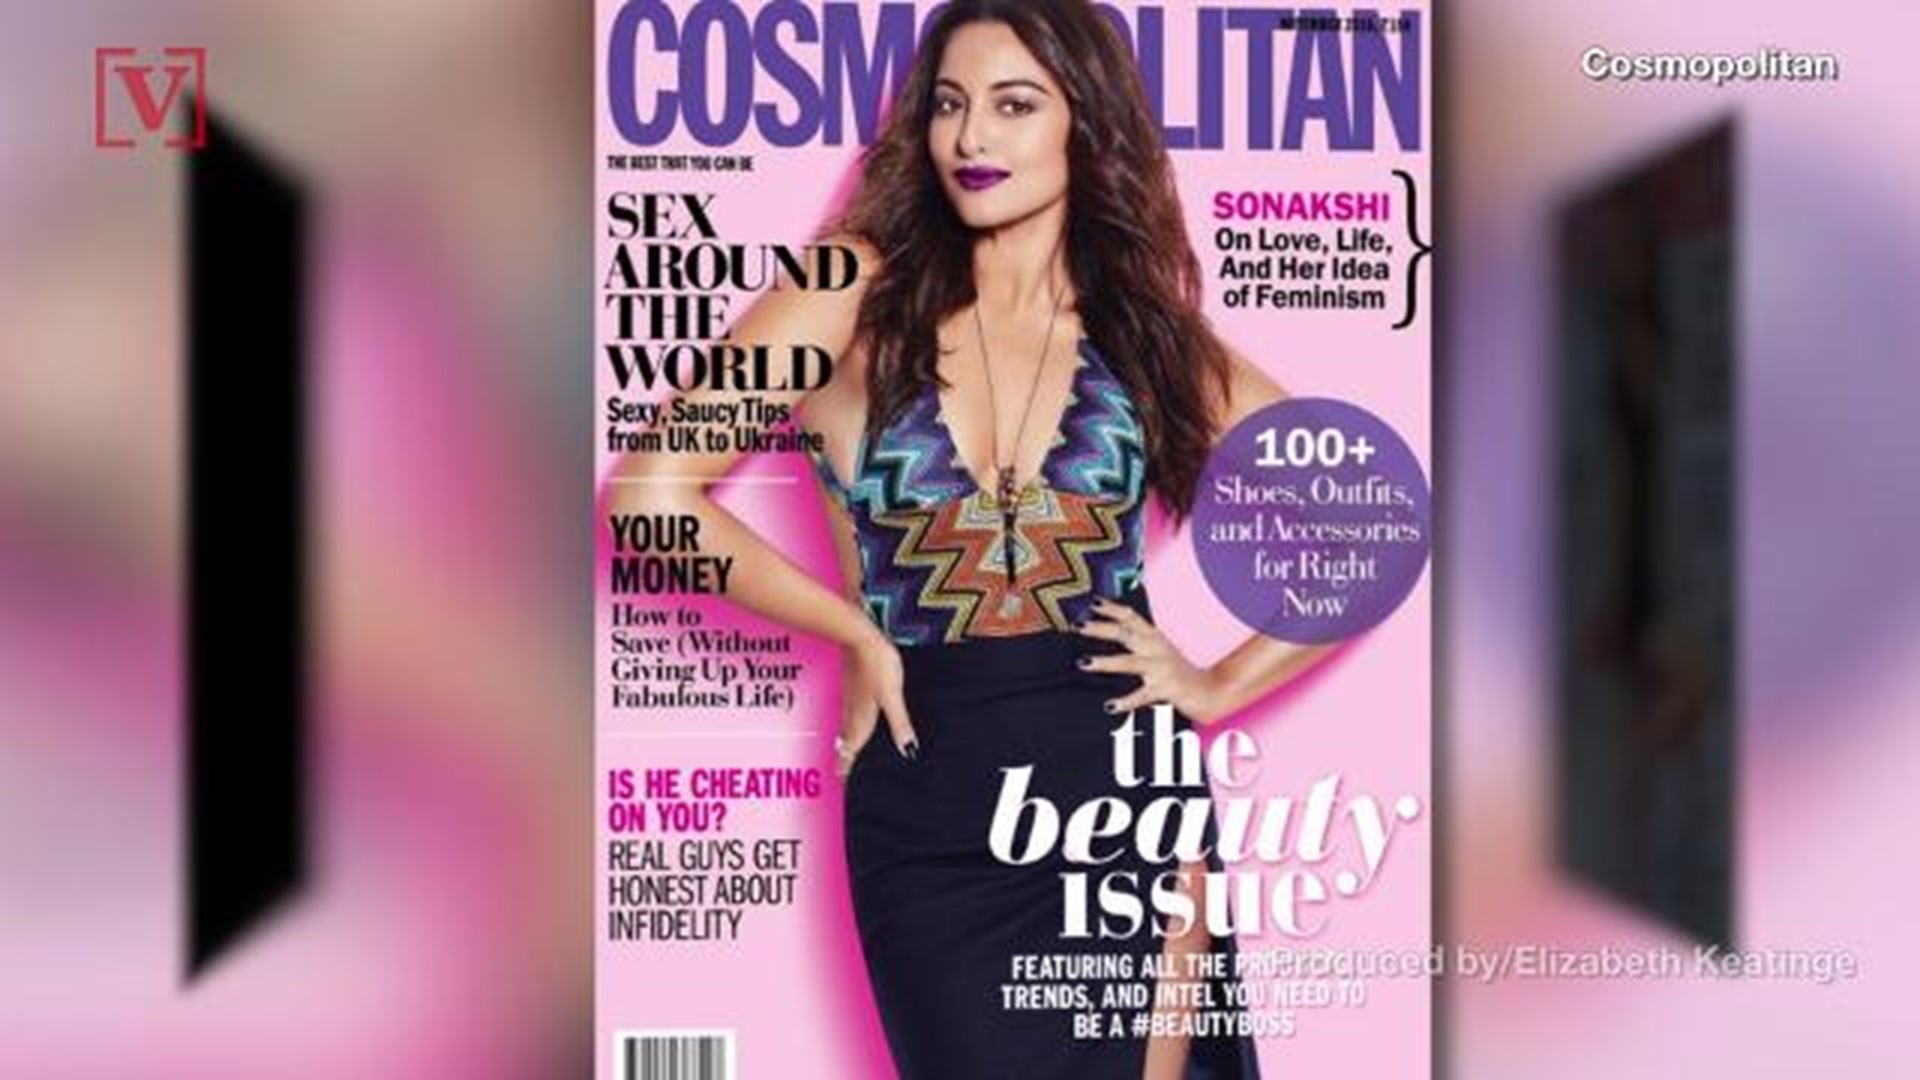 Sonakshi Xxx Video Download - Walmart to remove 'Cosmopolitan' from checkout lines, says it's a 'business  decision' | 13newsnow.com